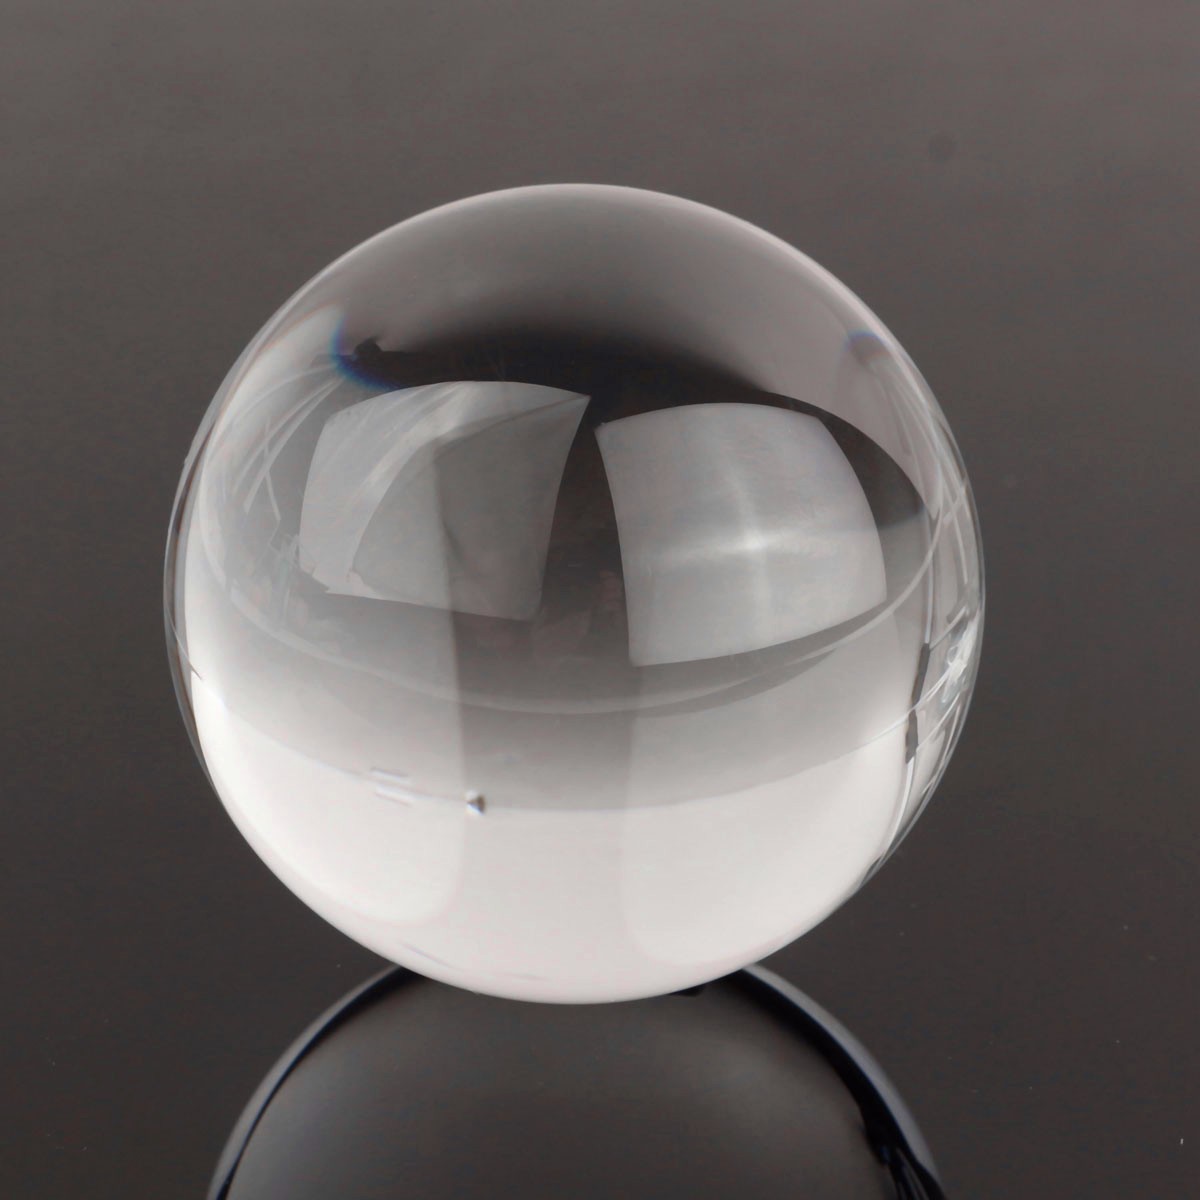 

60mm Clear Acrylic Ball Contact Juggling Manipulation Ball for Magic Gifts Divination